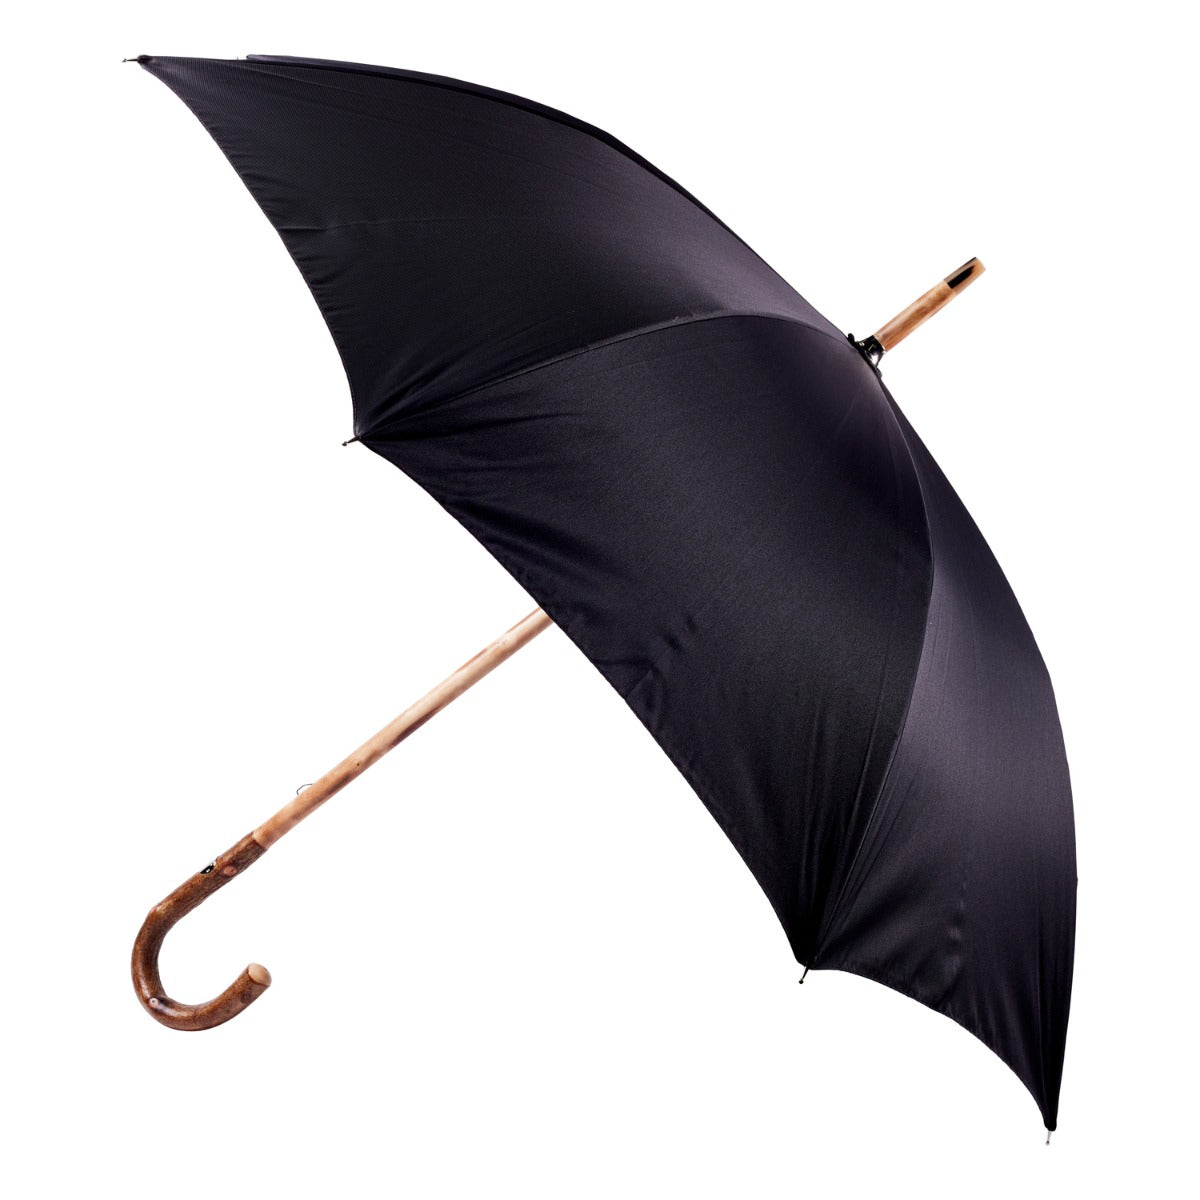 A Elm Wood Umbrella with Black Canopy from KirbyAllison.com, on a white background.